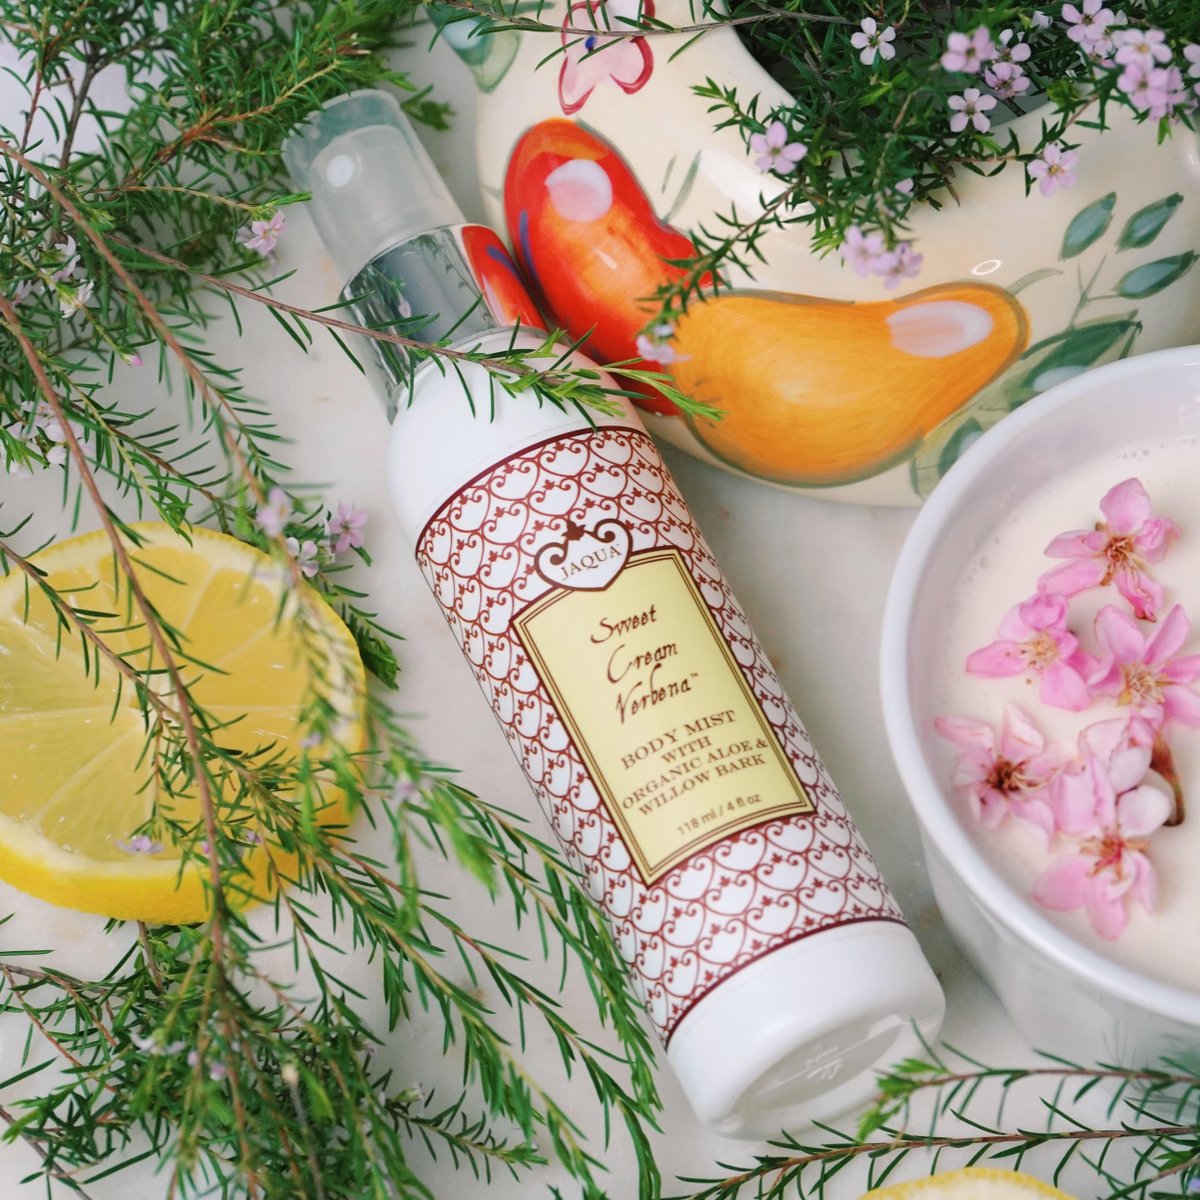 Sweet cream verbena is here and it's the perfect summer scent!🏵️
∙
∙
∙
#jaquabeauty #skincarebrand #kitchengoals #smallbusinesslife #homedecorlove